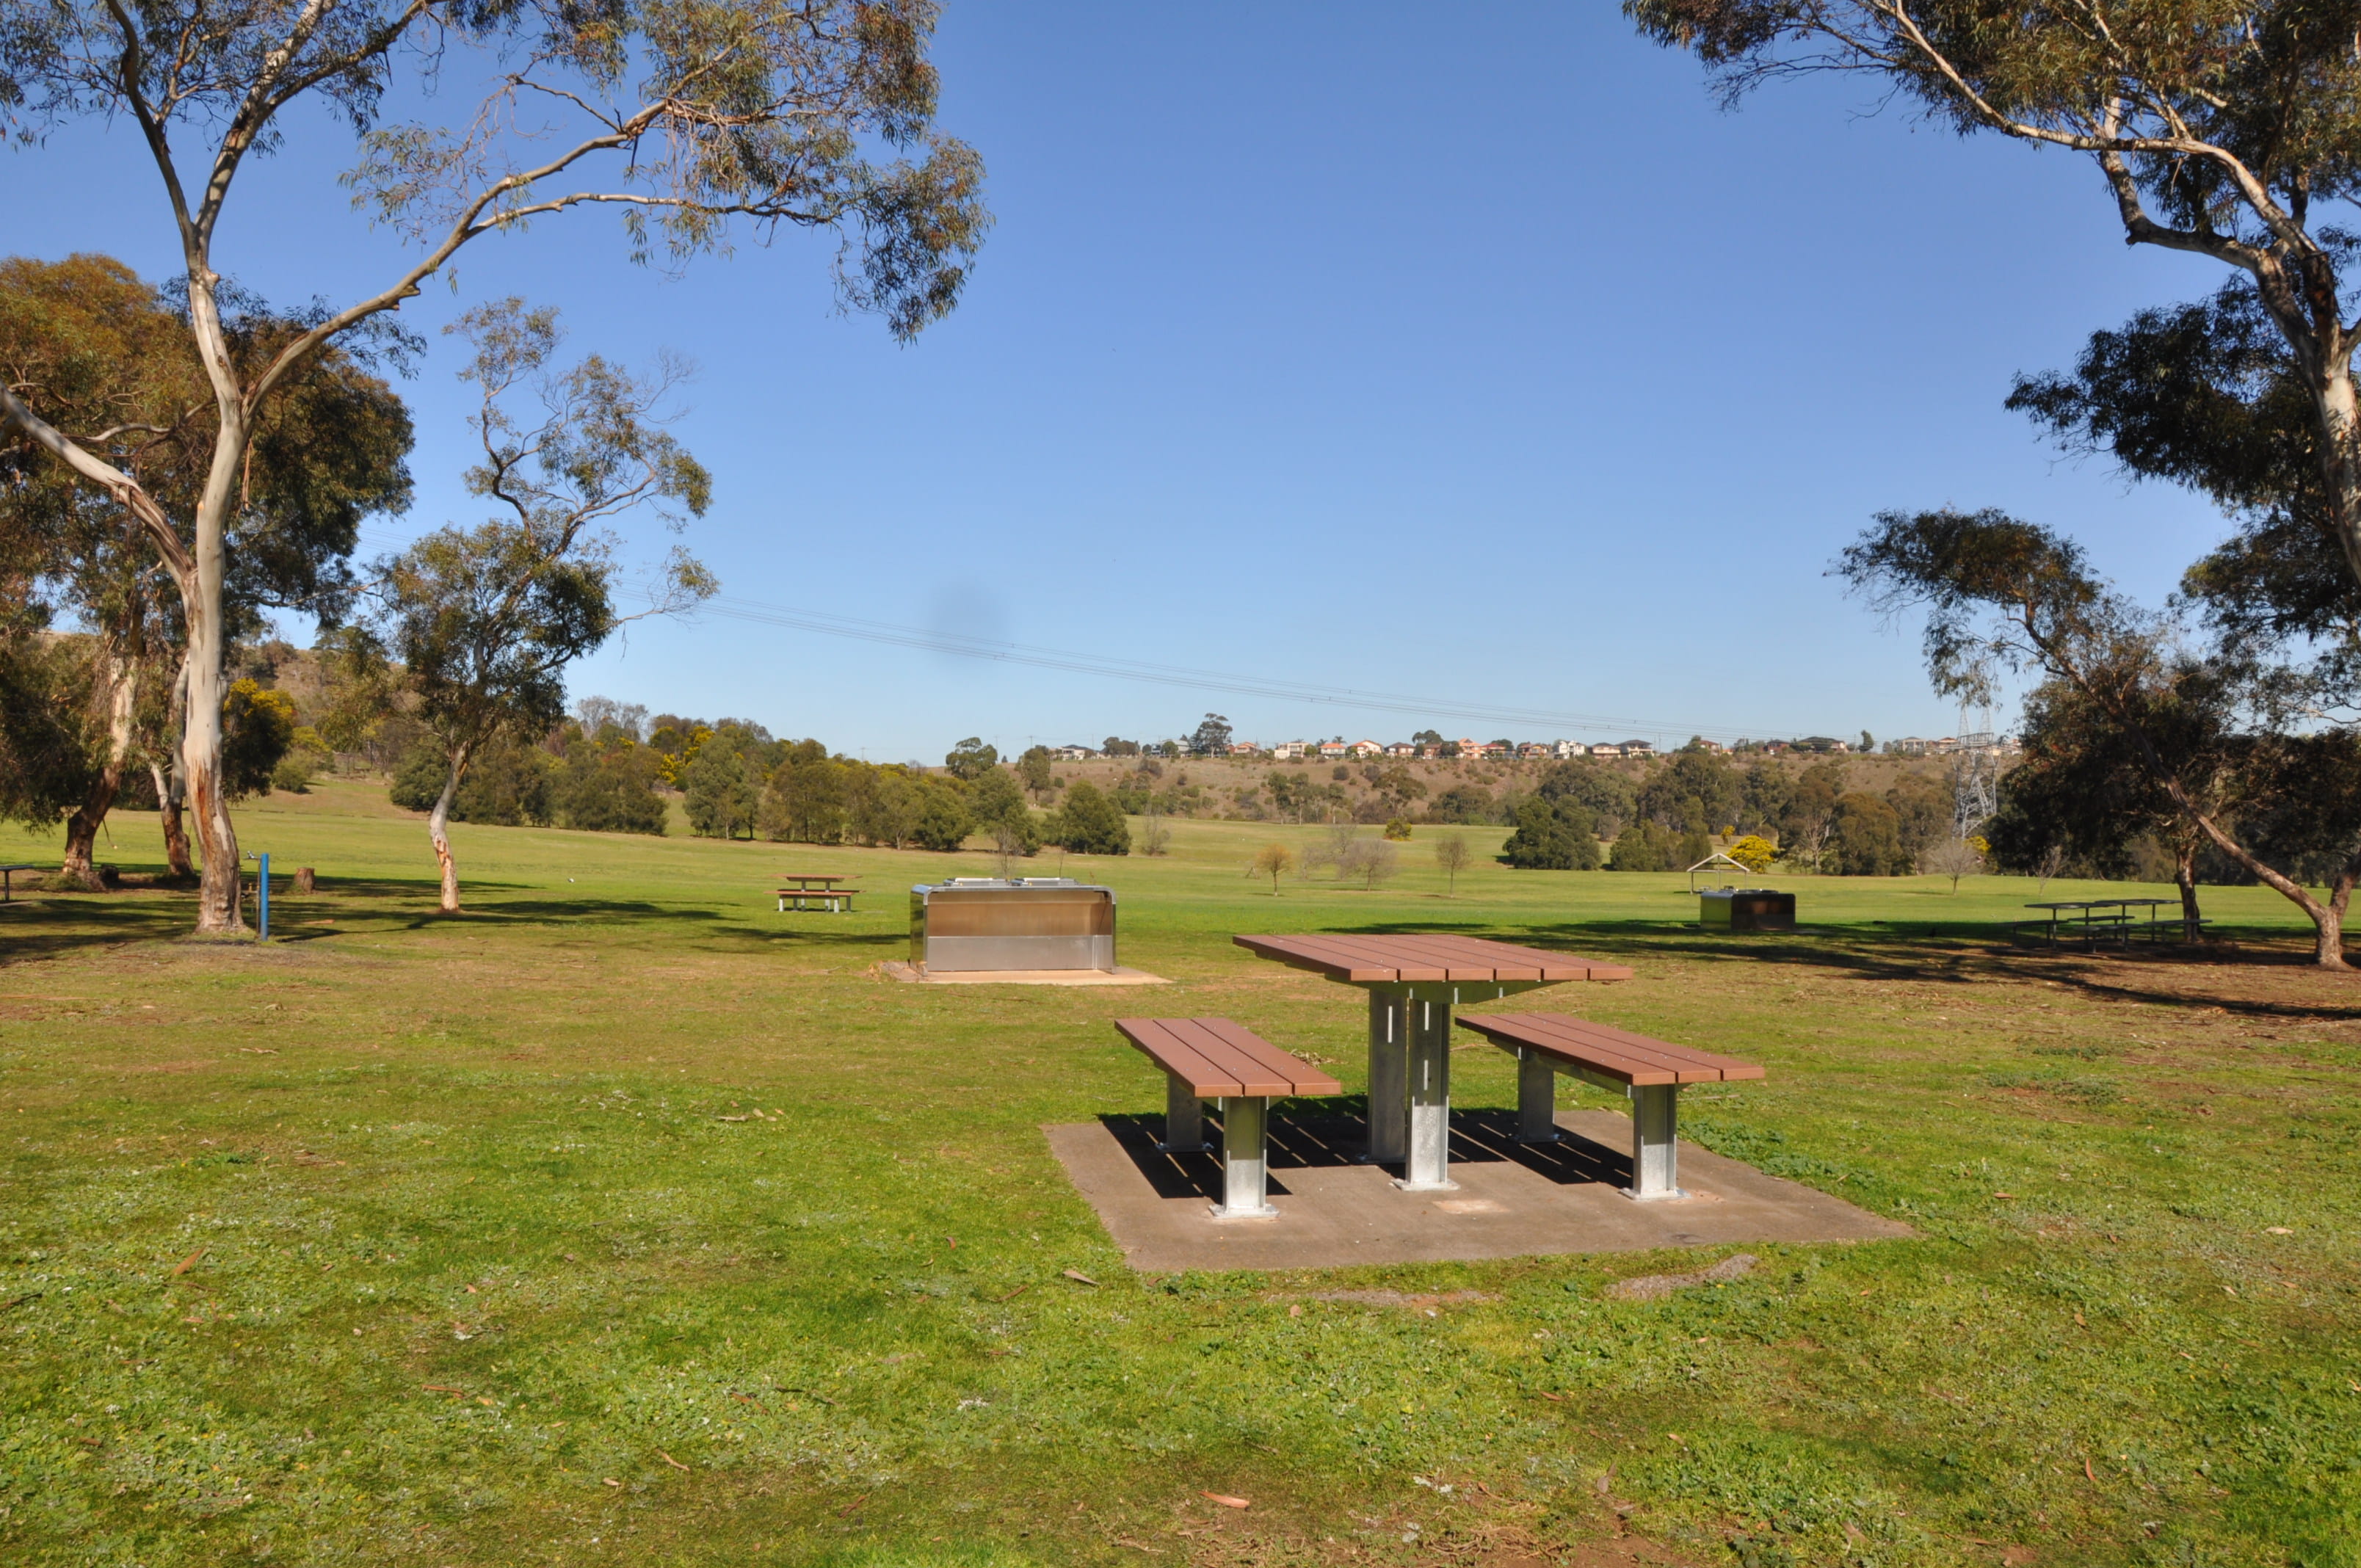 New picnic tables and barbecues at Brimbank Park. They are spread out over a grassy area, with trees and a blue sky in the background.